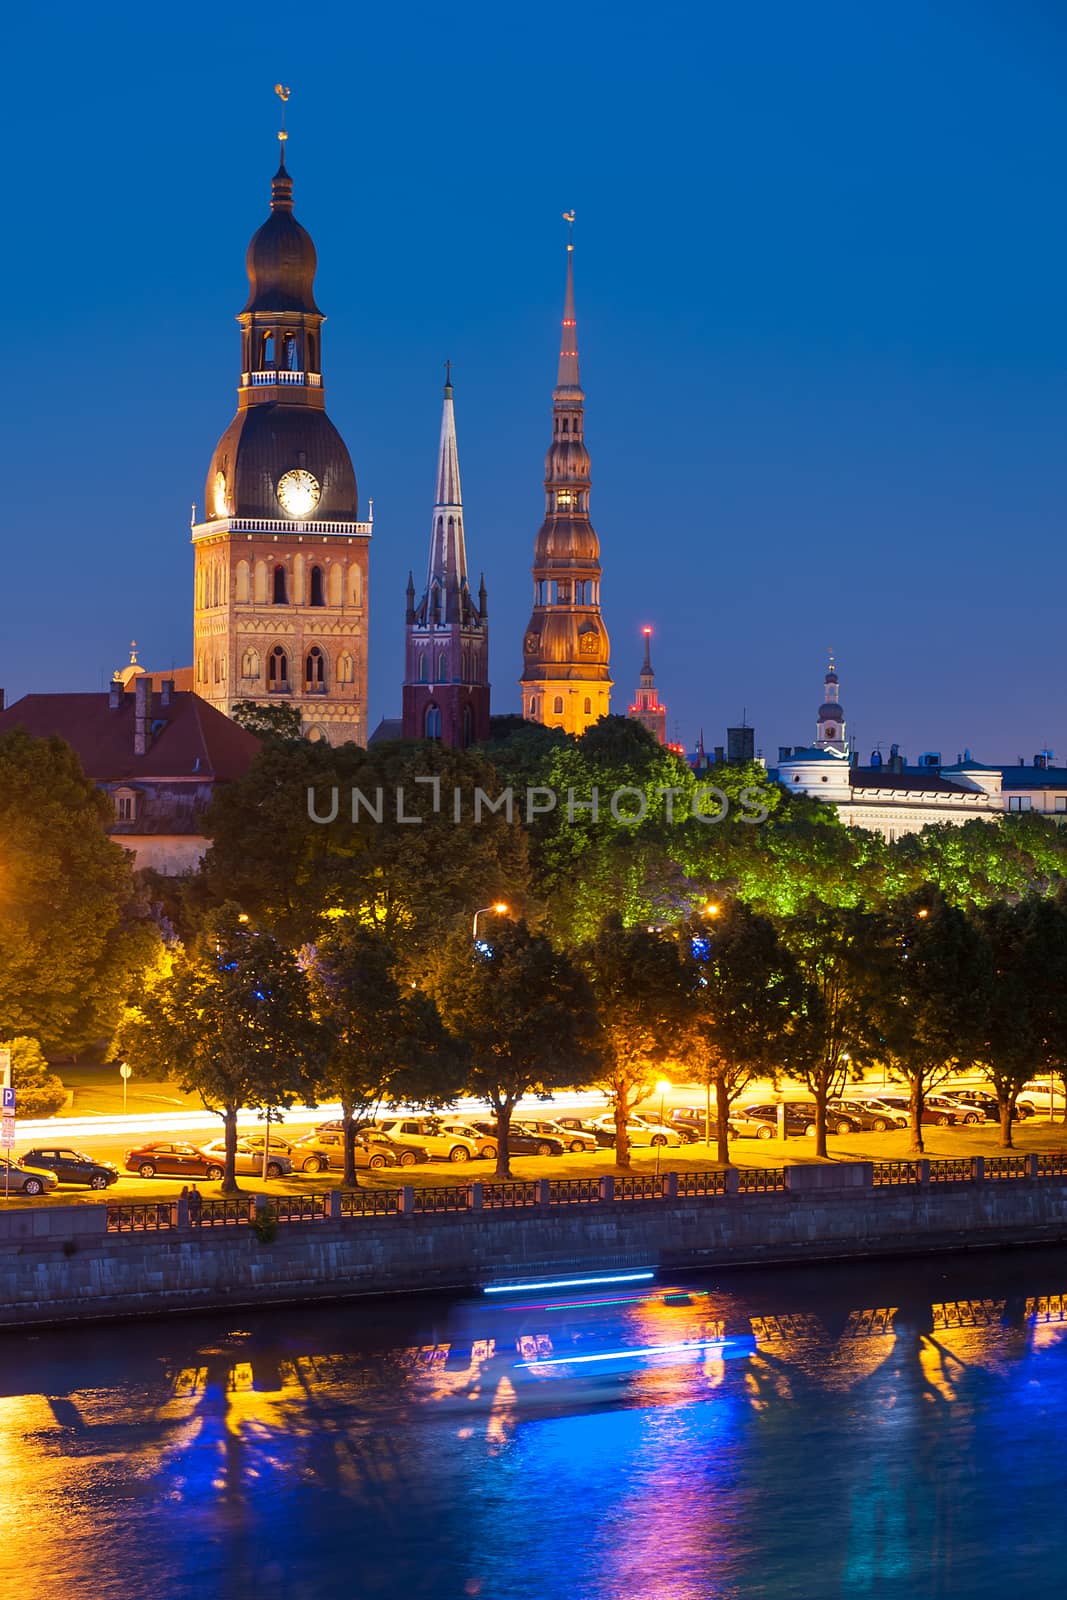 Towers of Riga seen across the river Daugava after the sunset. Three church towers in the picture are the Riga Dome cathedral,  St. Saviour's Church and St. Peter's church. On the right is Building of Academy of Sciences